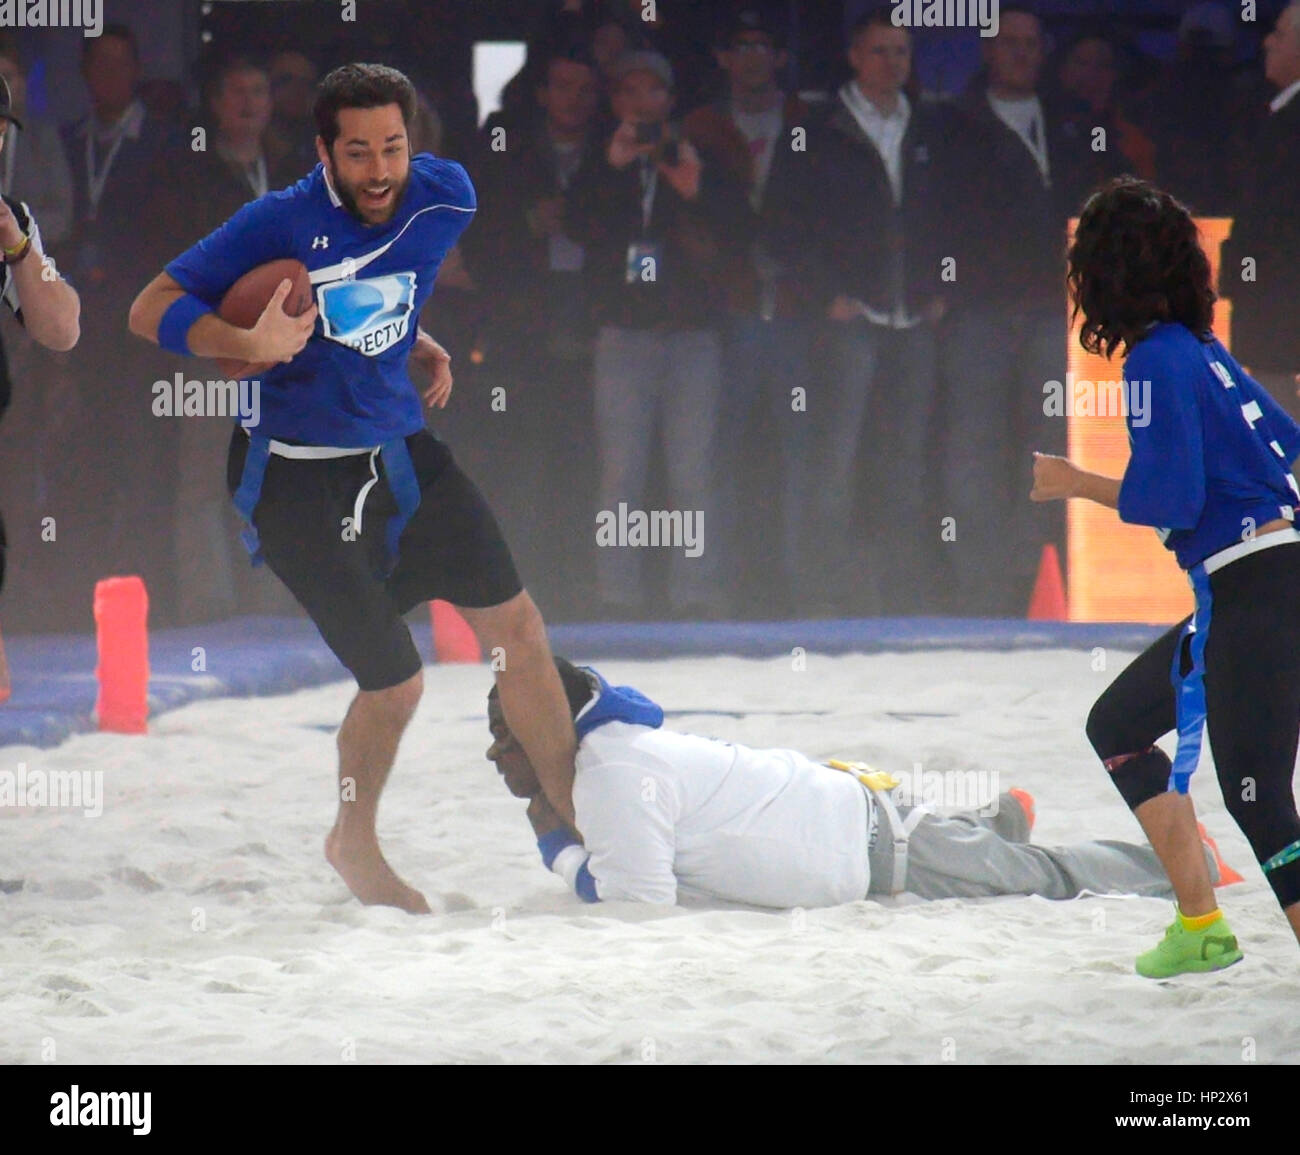 Zachary Levi gets tackled by Tracy Morgan at Directv's 8th Annual Celebrity Beach Bowl on February 1, 2014 in New York, NY. Photo by Francis Specker Stock Photo